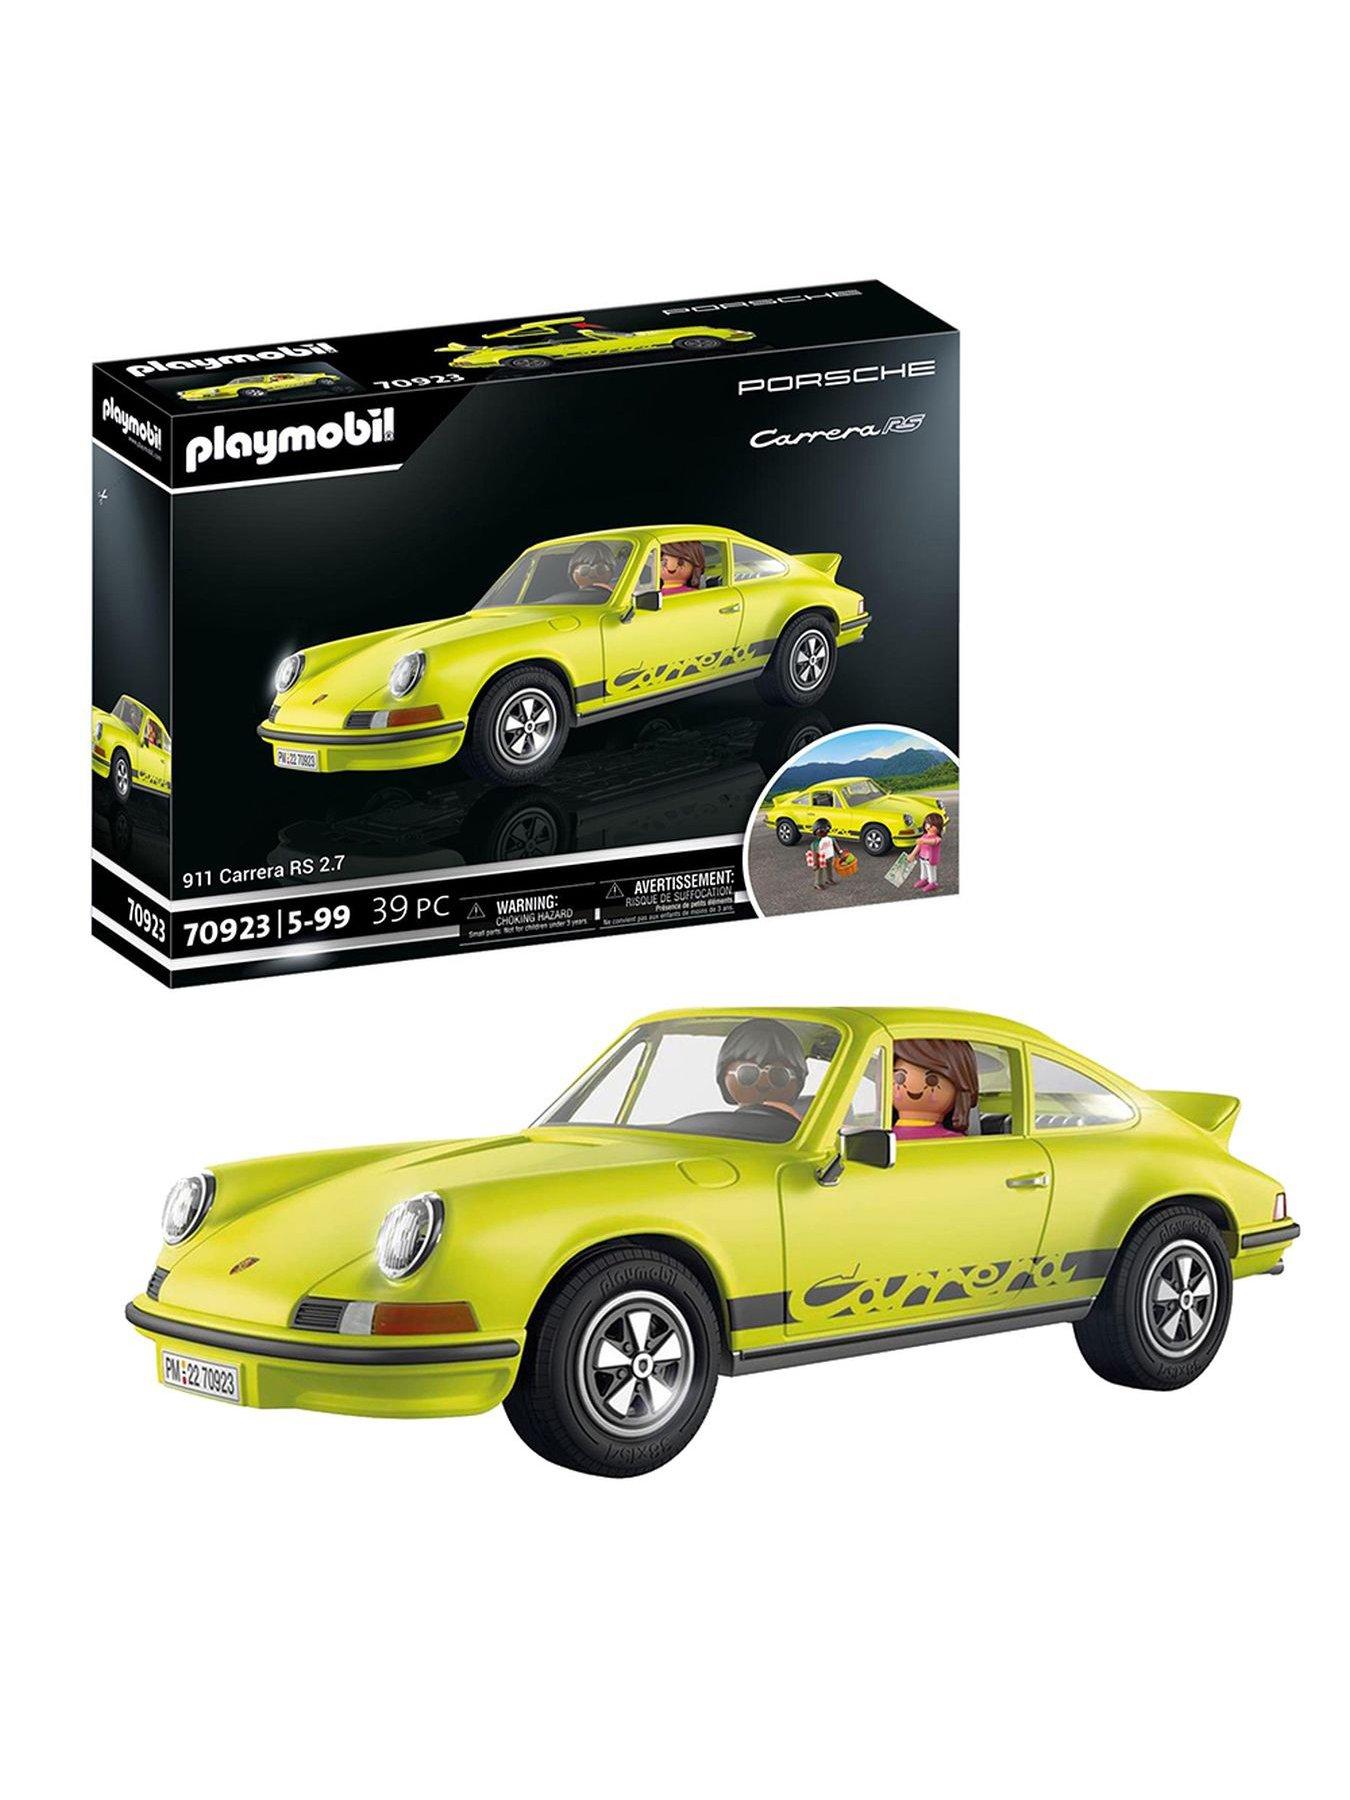 Playmobil Porsche 911 Carrera RS 2.7 70923 (for Kids 5 Years Old and Up)